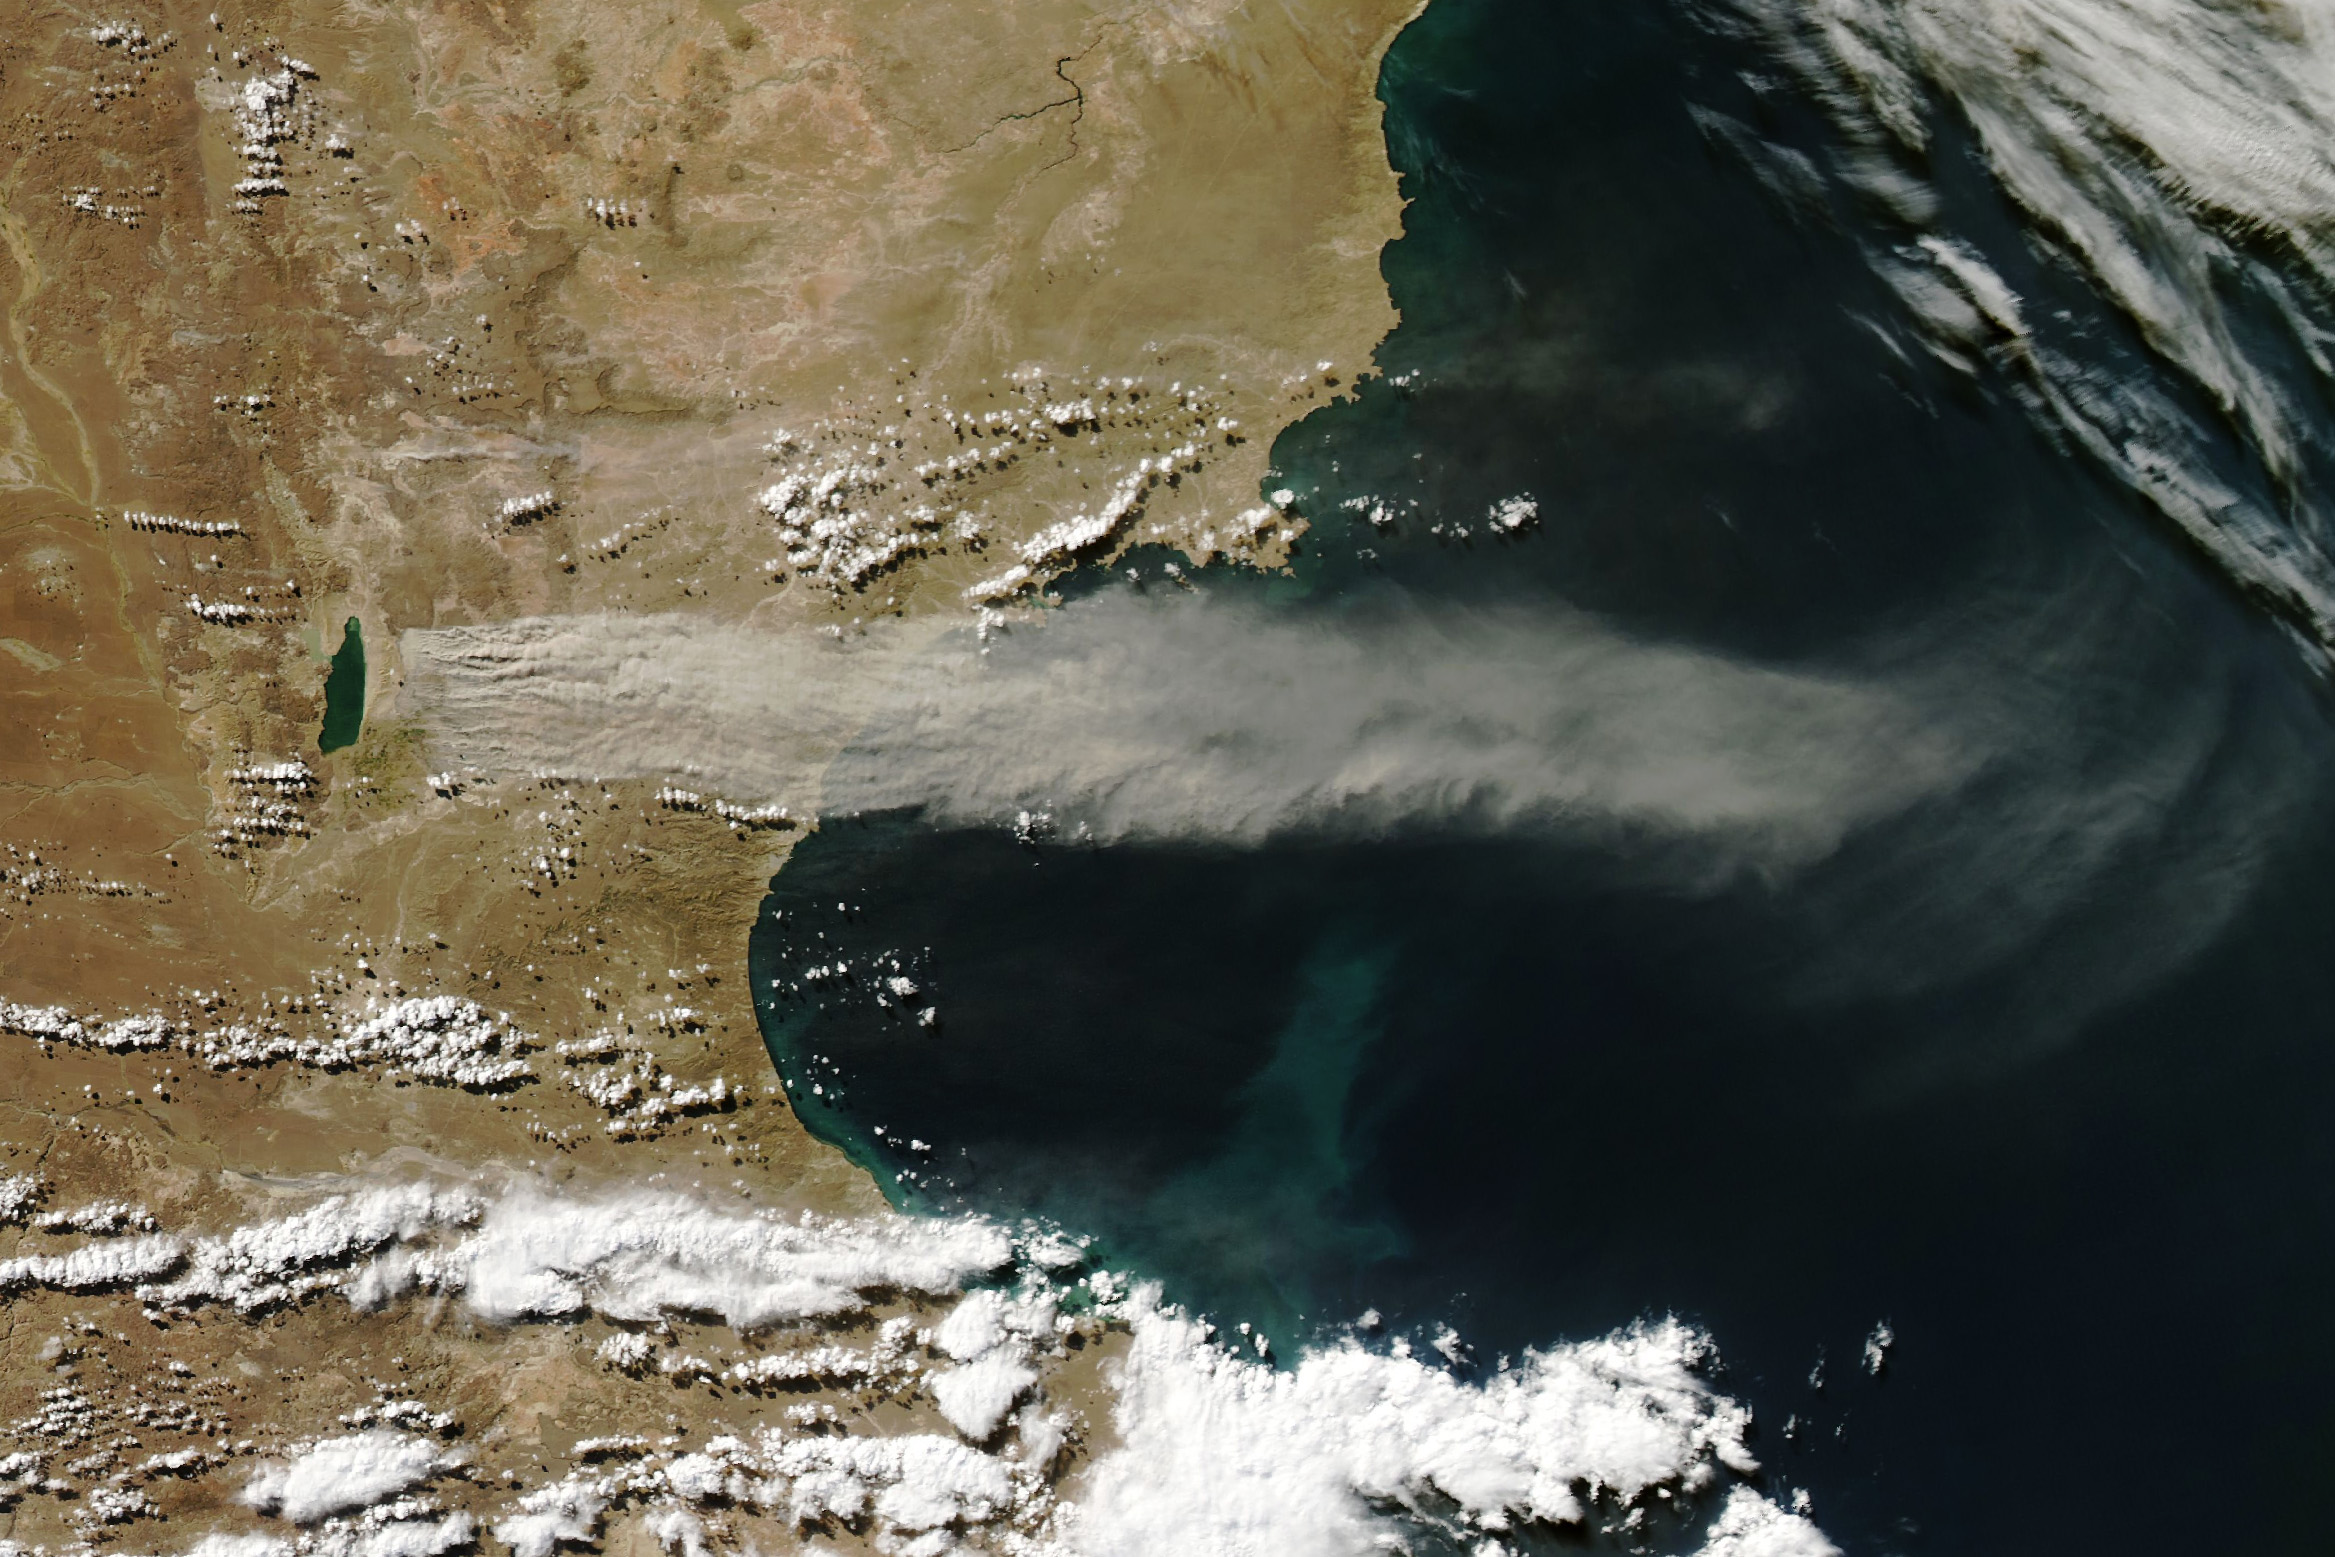 landmass of Agentina, left, and the Atlantic Ocean, right are featured around the San Jorge Gulf alcove in the coastline. Centered in the image is a horizontal stream of dust that stretches from the inland Lago Musters fully across the gulf and dissipates out in open ocean air. White Cumulus clouds are scattered south and mostly west of the San Jorge Gulf